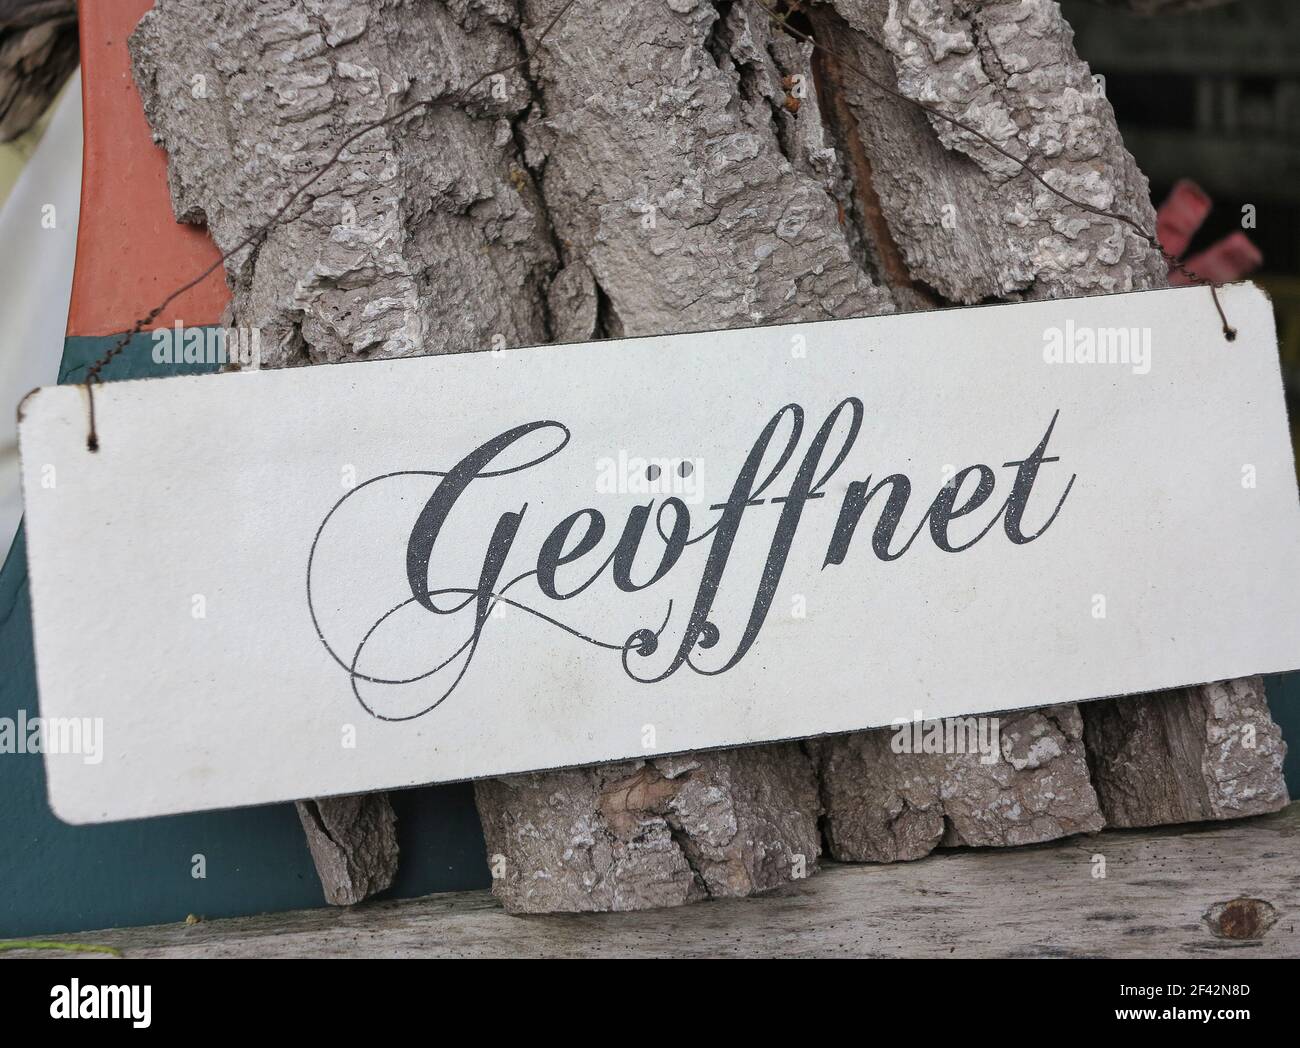 Metal sign with the German word 'Geöffnet' which translates into 'Open' in English language Stock Photo